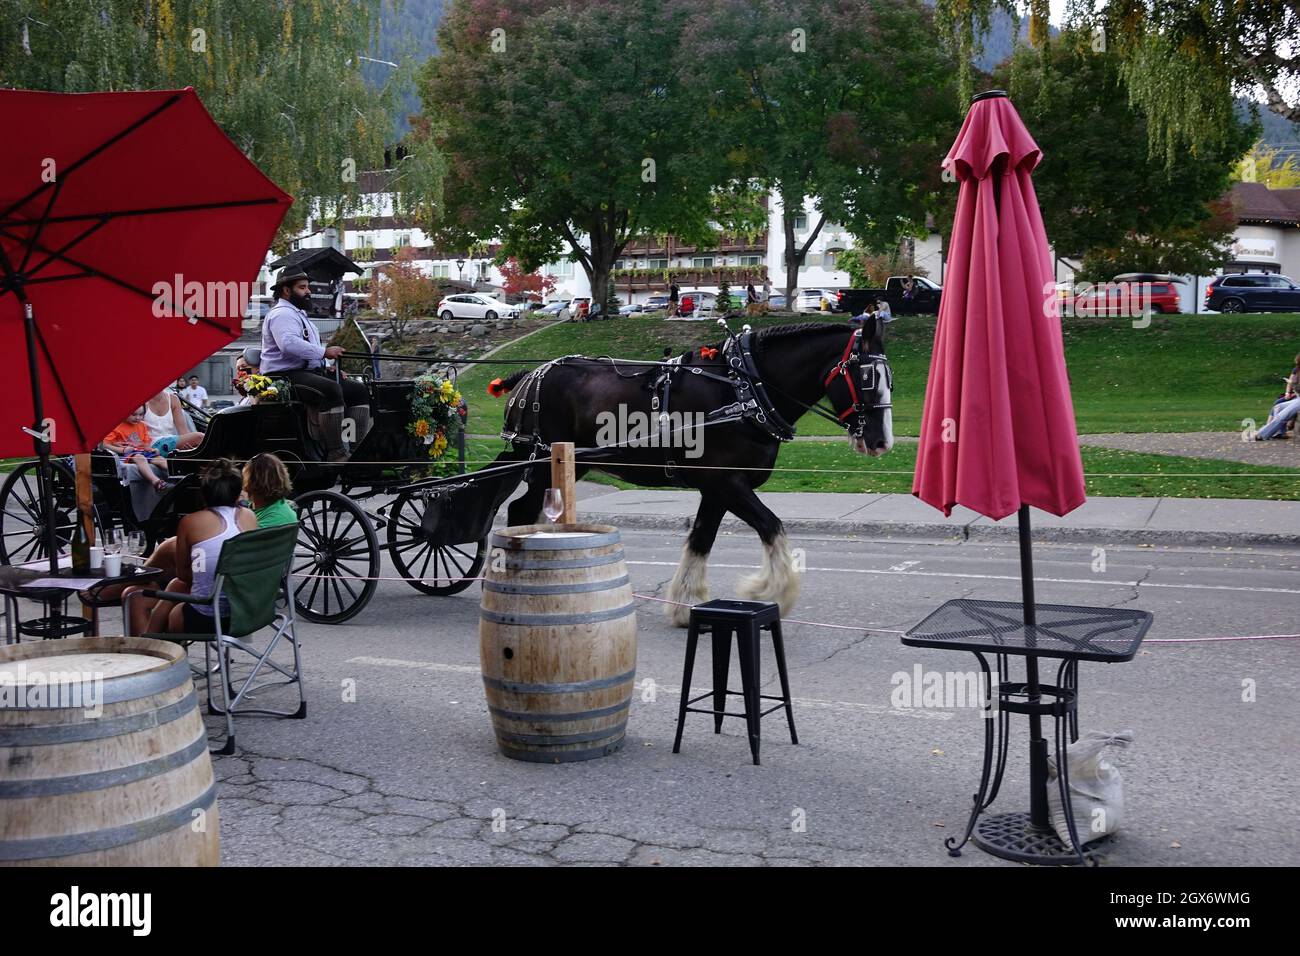 Leavenworth is a Bavarian-styled village in the Cascade Mountains, in central Washington State. Alpine-style buildings with restaurants serving German Stock Photo